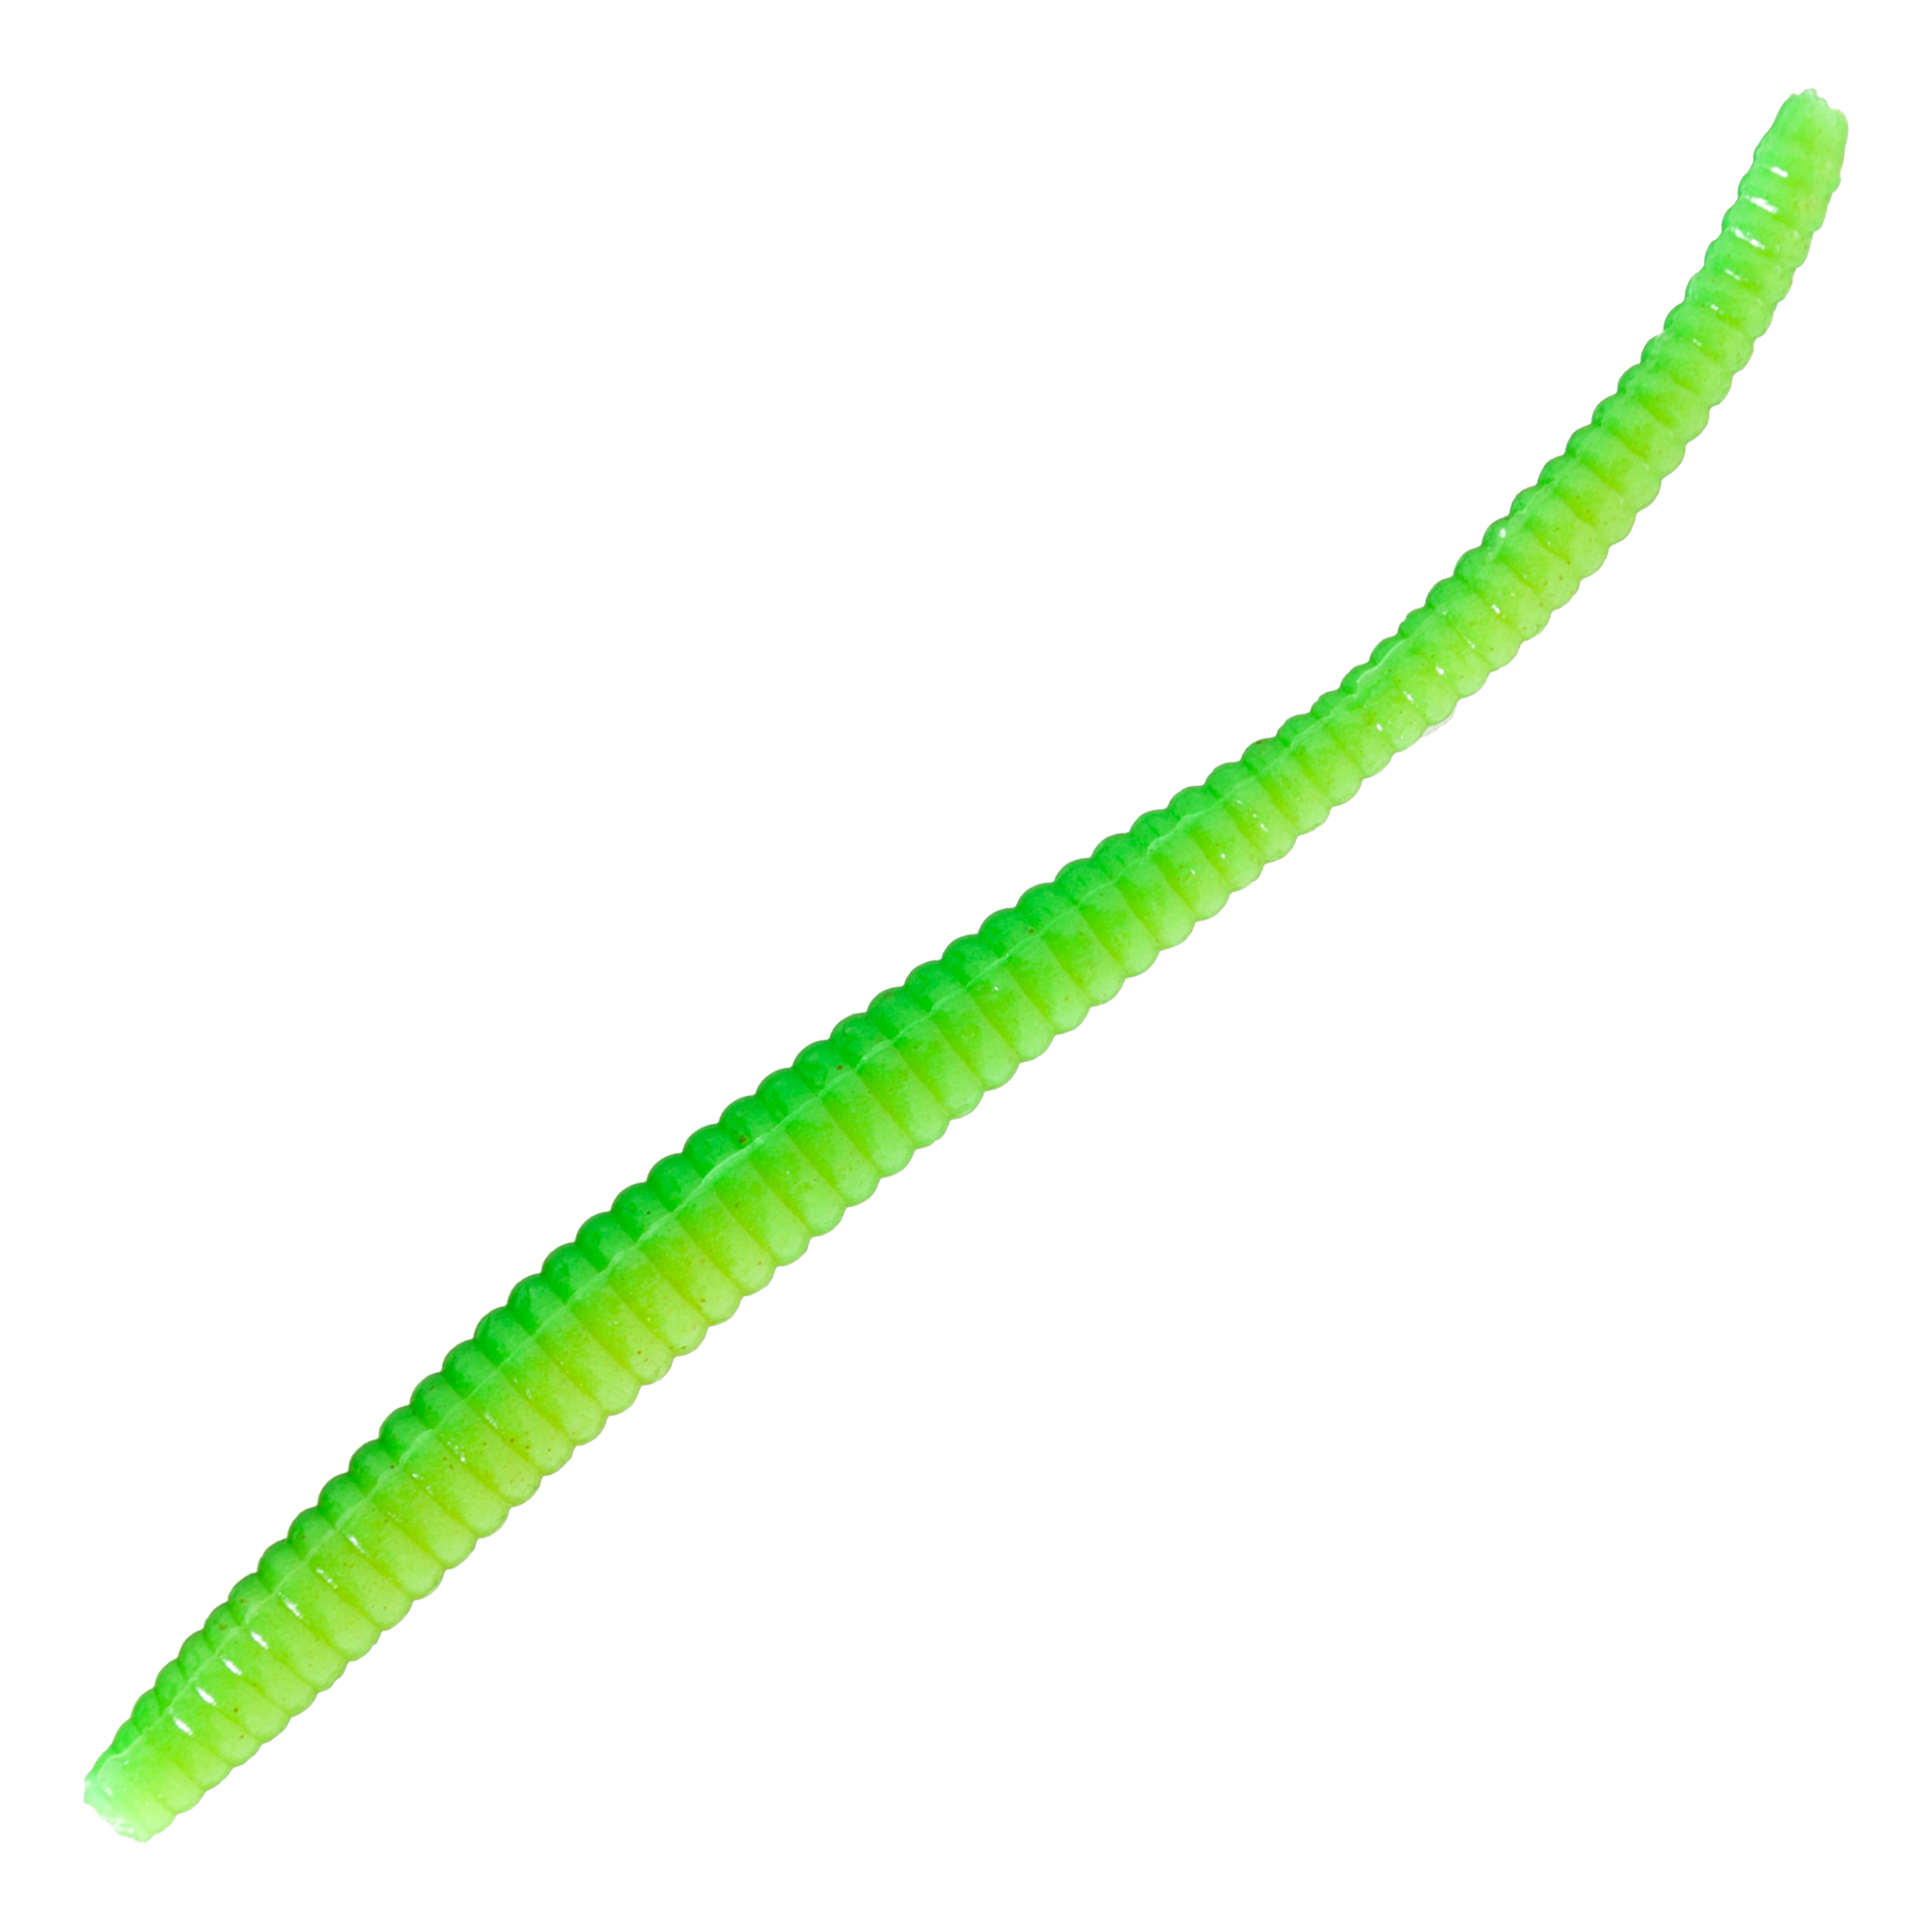 Berkley PowerBait Power Floating Trout Worm Fishing Bait, Chartreuse Shad,  3in